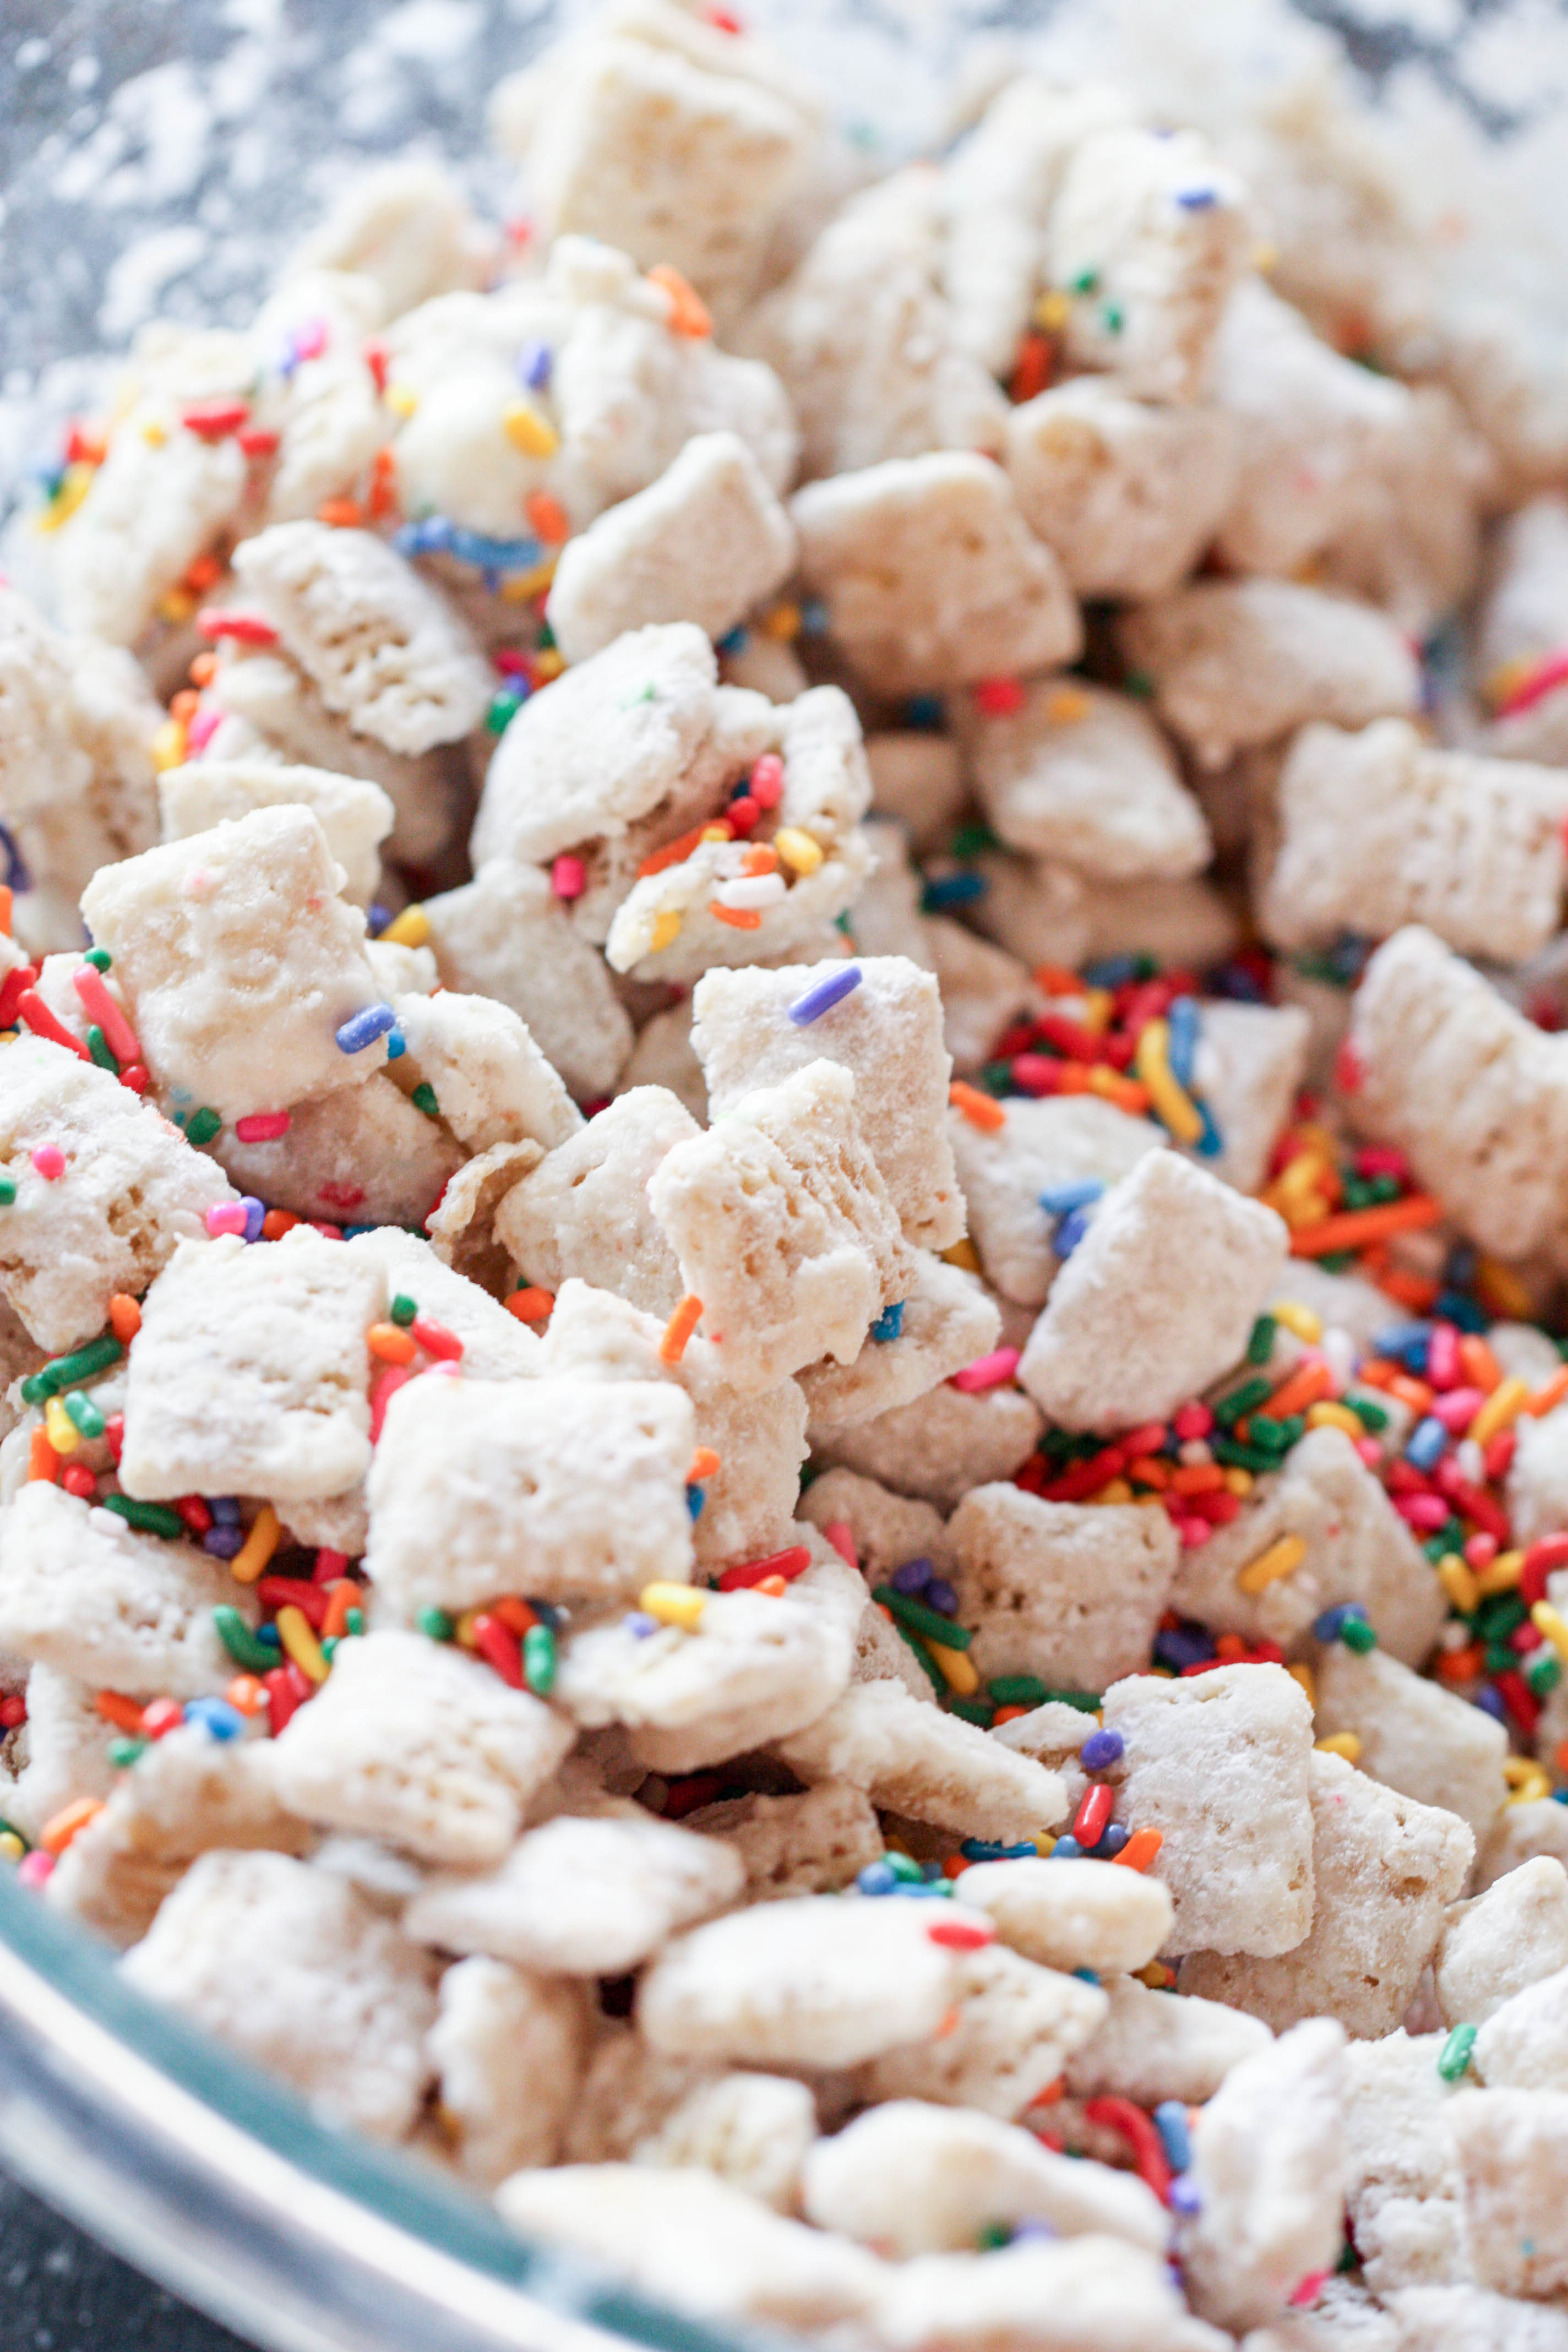 Cake Batter Chex Mix buddies with sprinkles